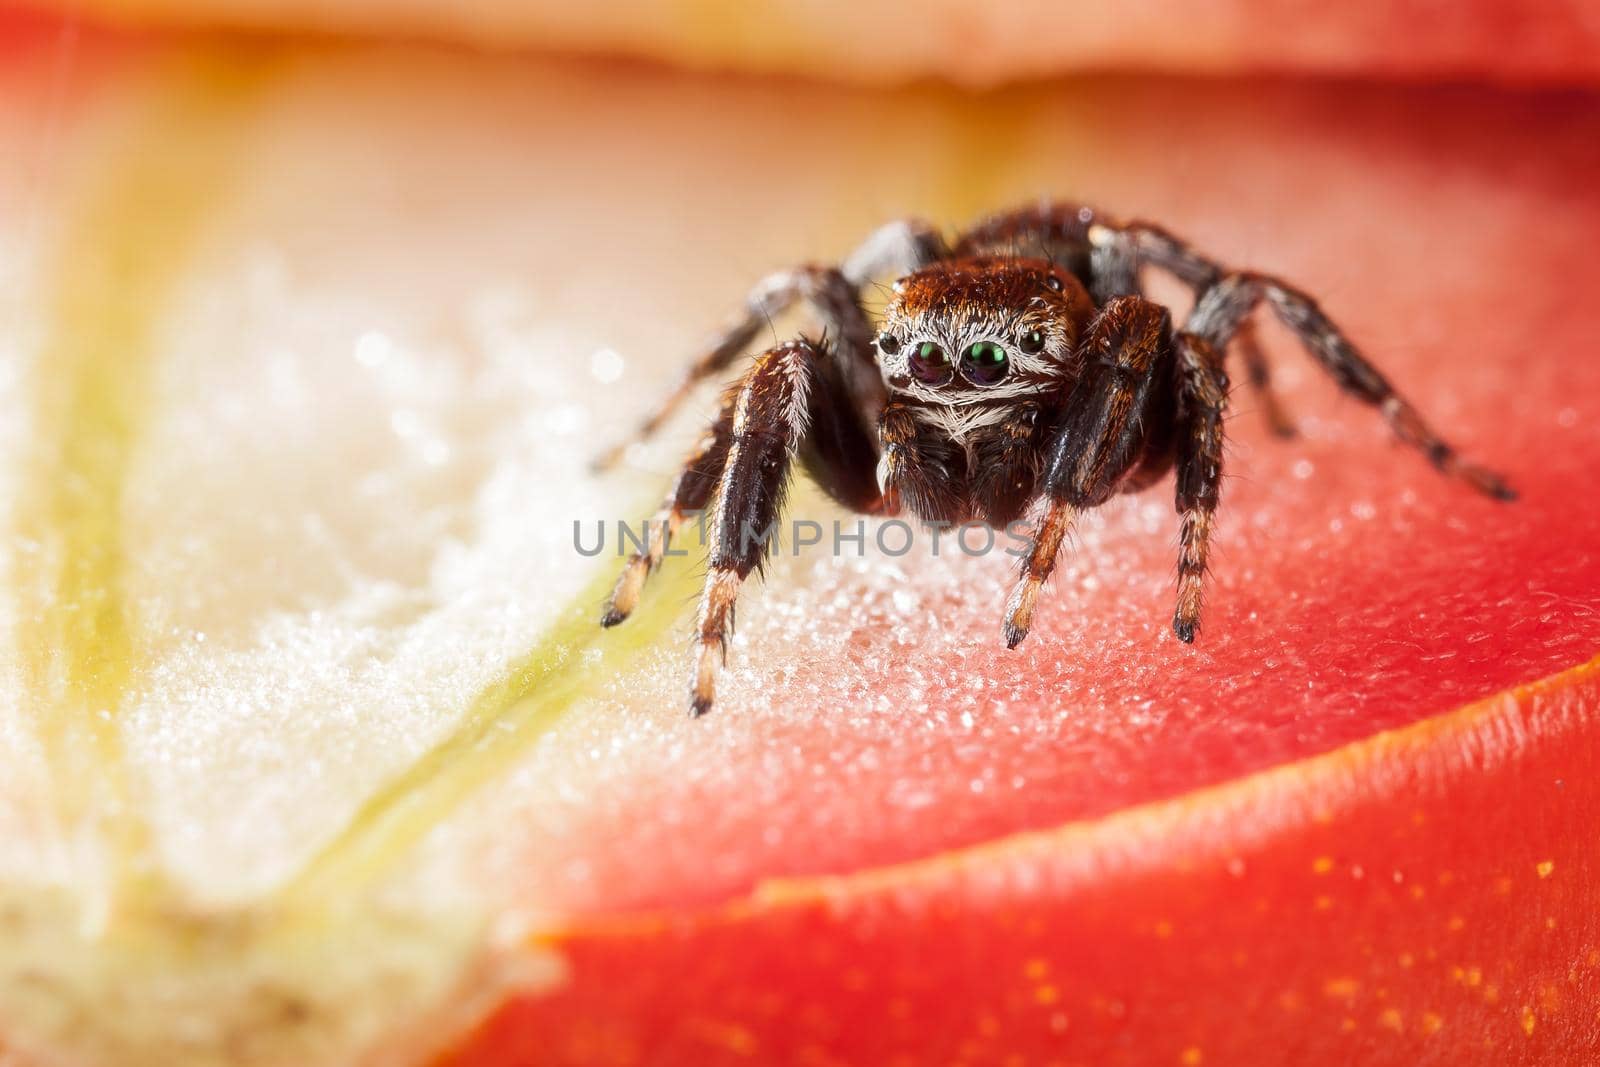 Jumping spider inside the tomato, resembling a beautiful red scene